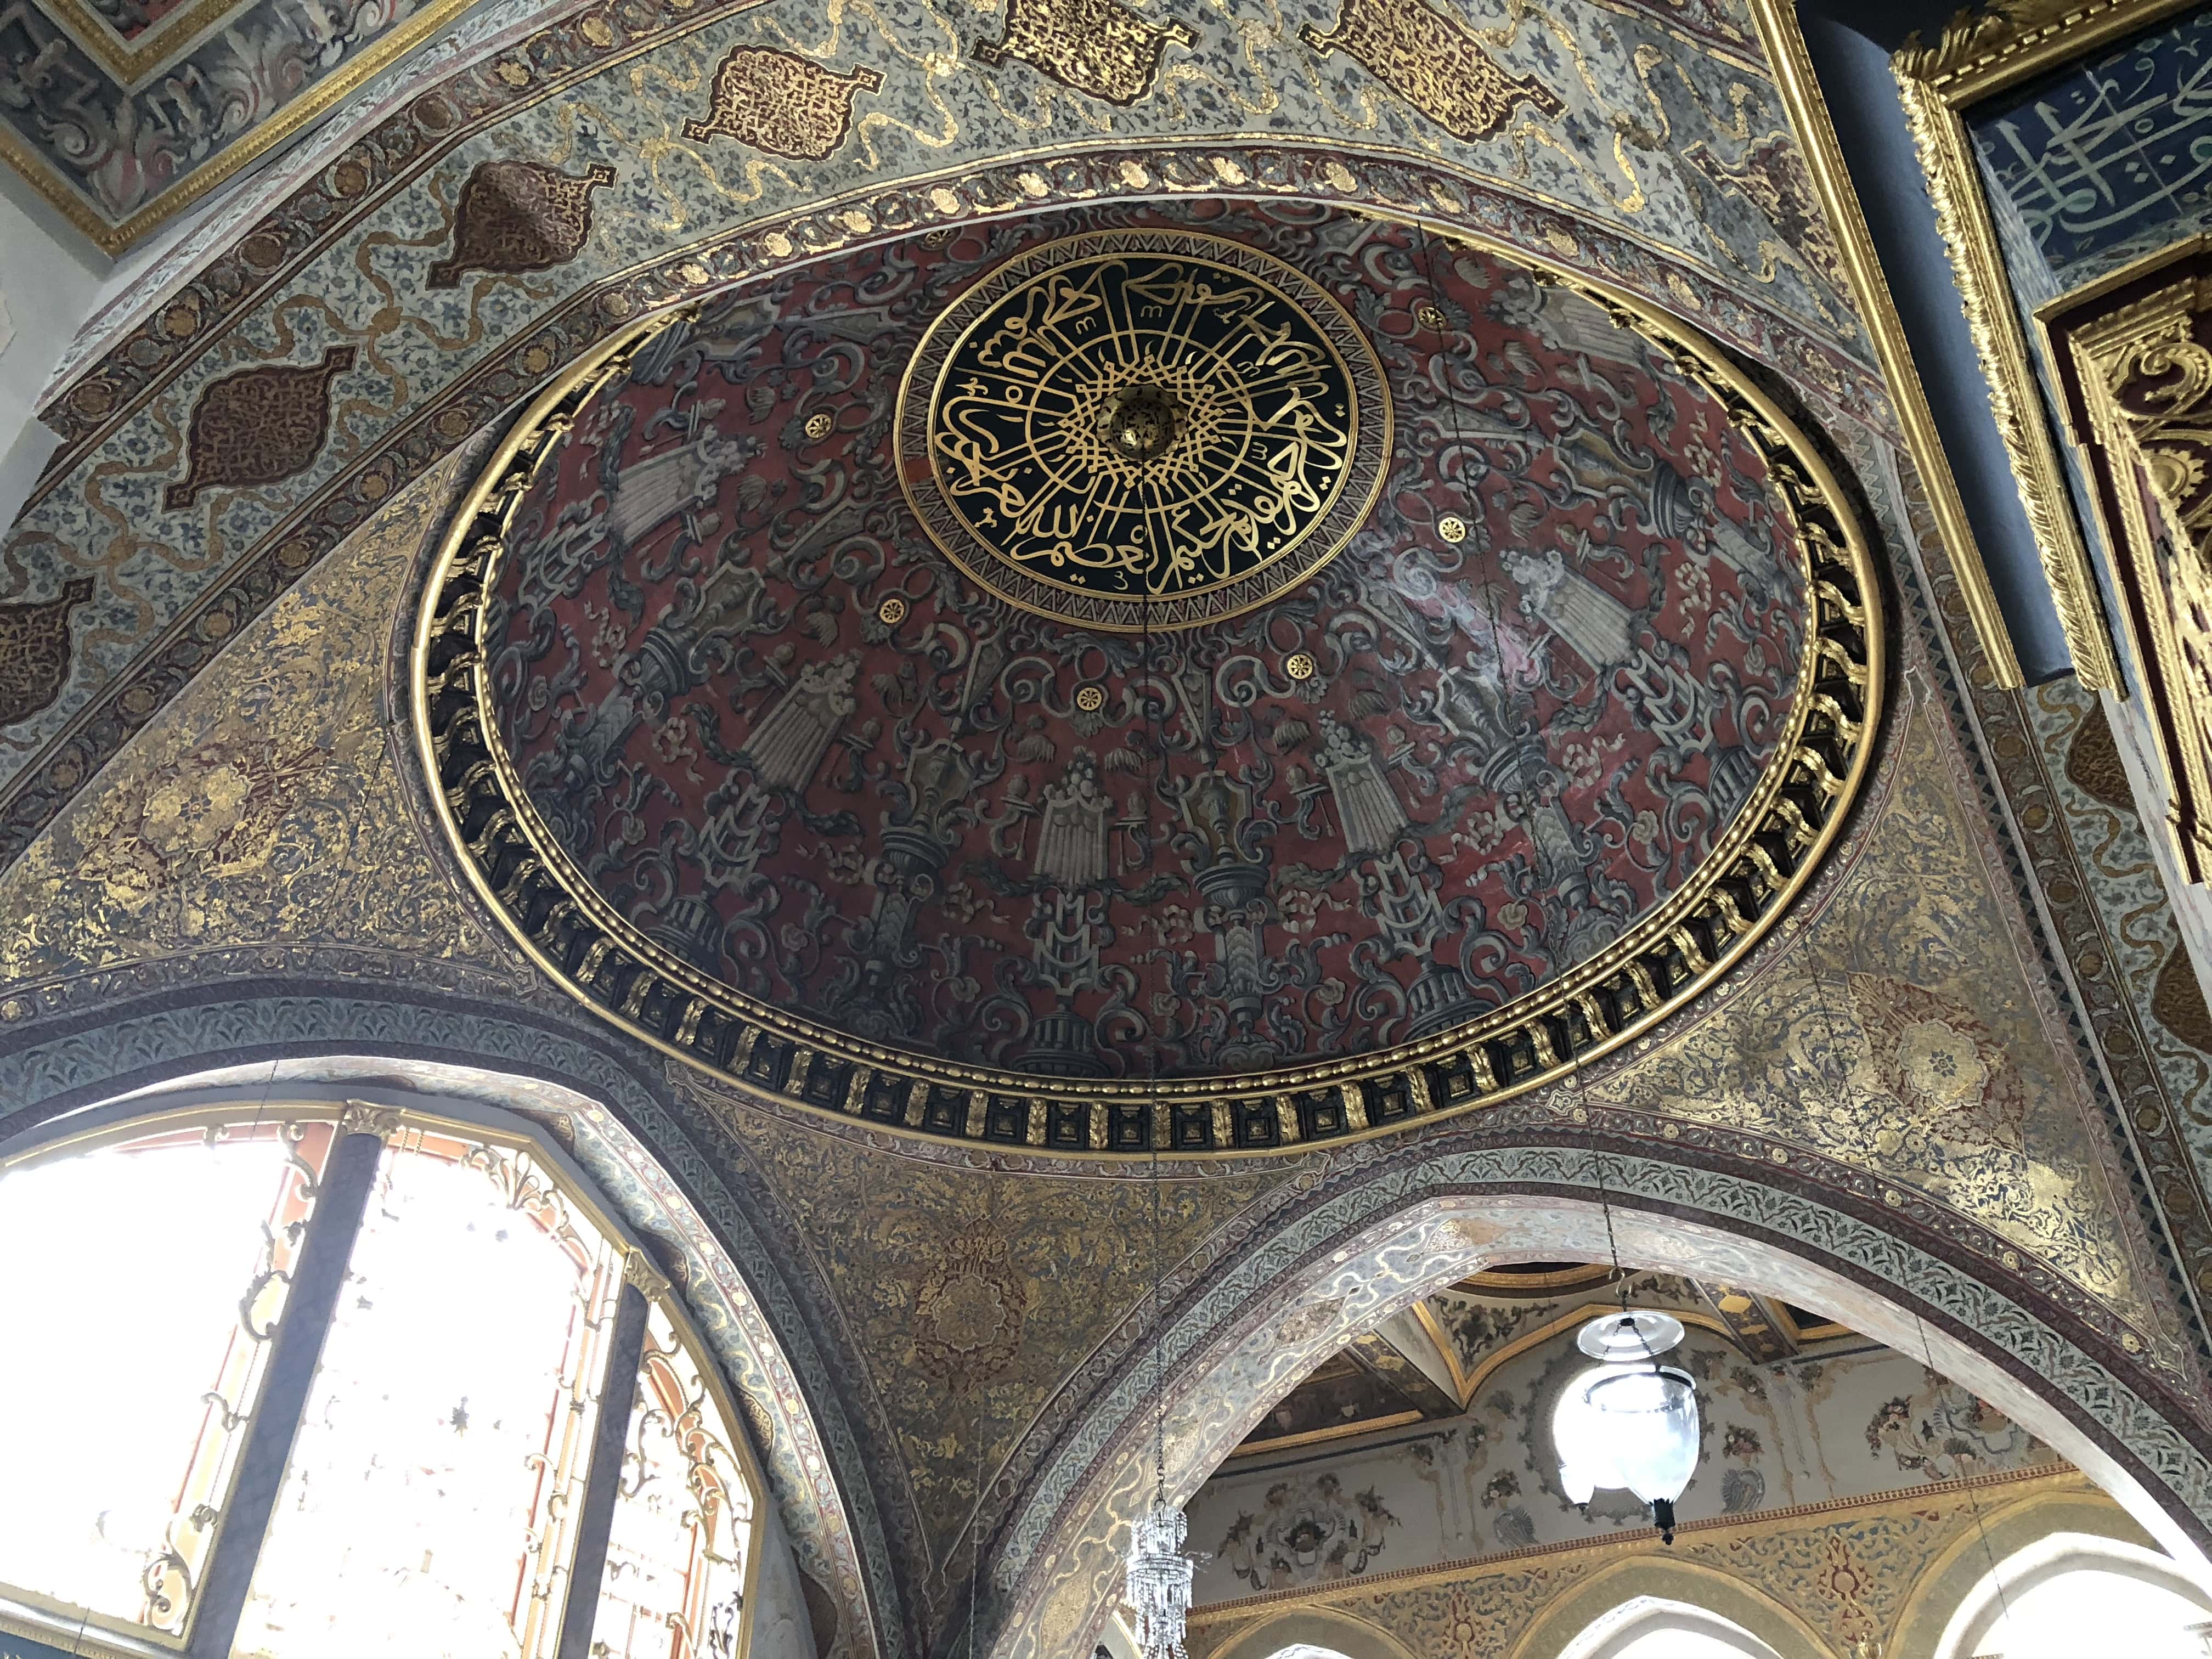 Dome after restoration in the Imperial Hall in the Imperial Harem at Topkapi Palace in Istanbul, Turkey